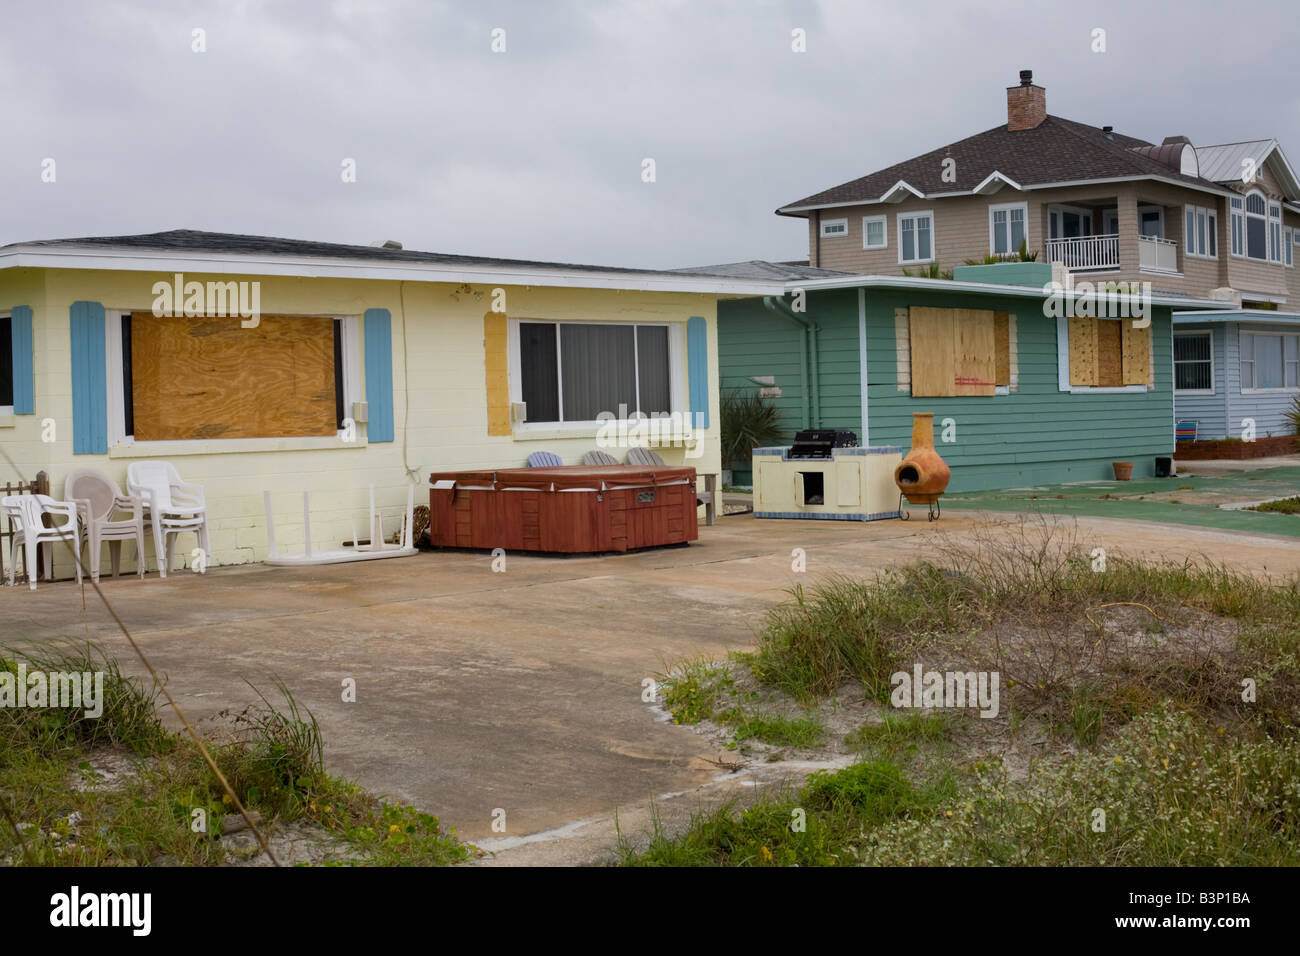 Oceanfront homes, Jacksonville Beach, Florida boarded up for protection from Tropical Storm Hanna, Sept 5 2008 Stock Photo